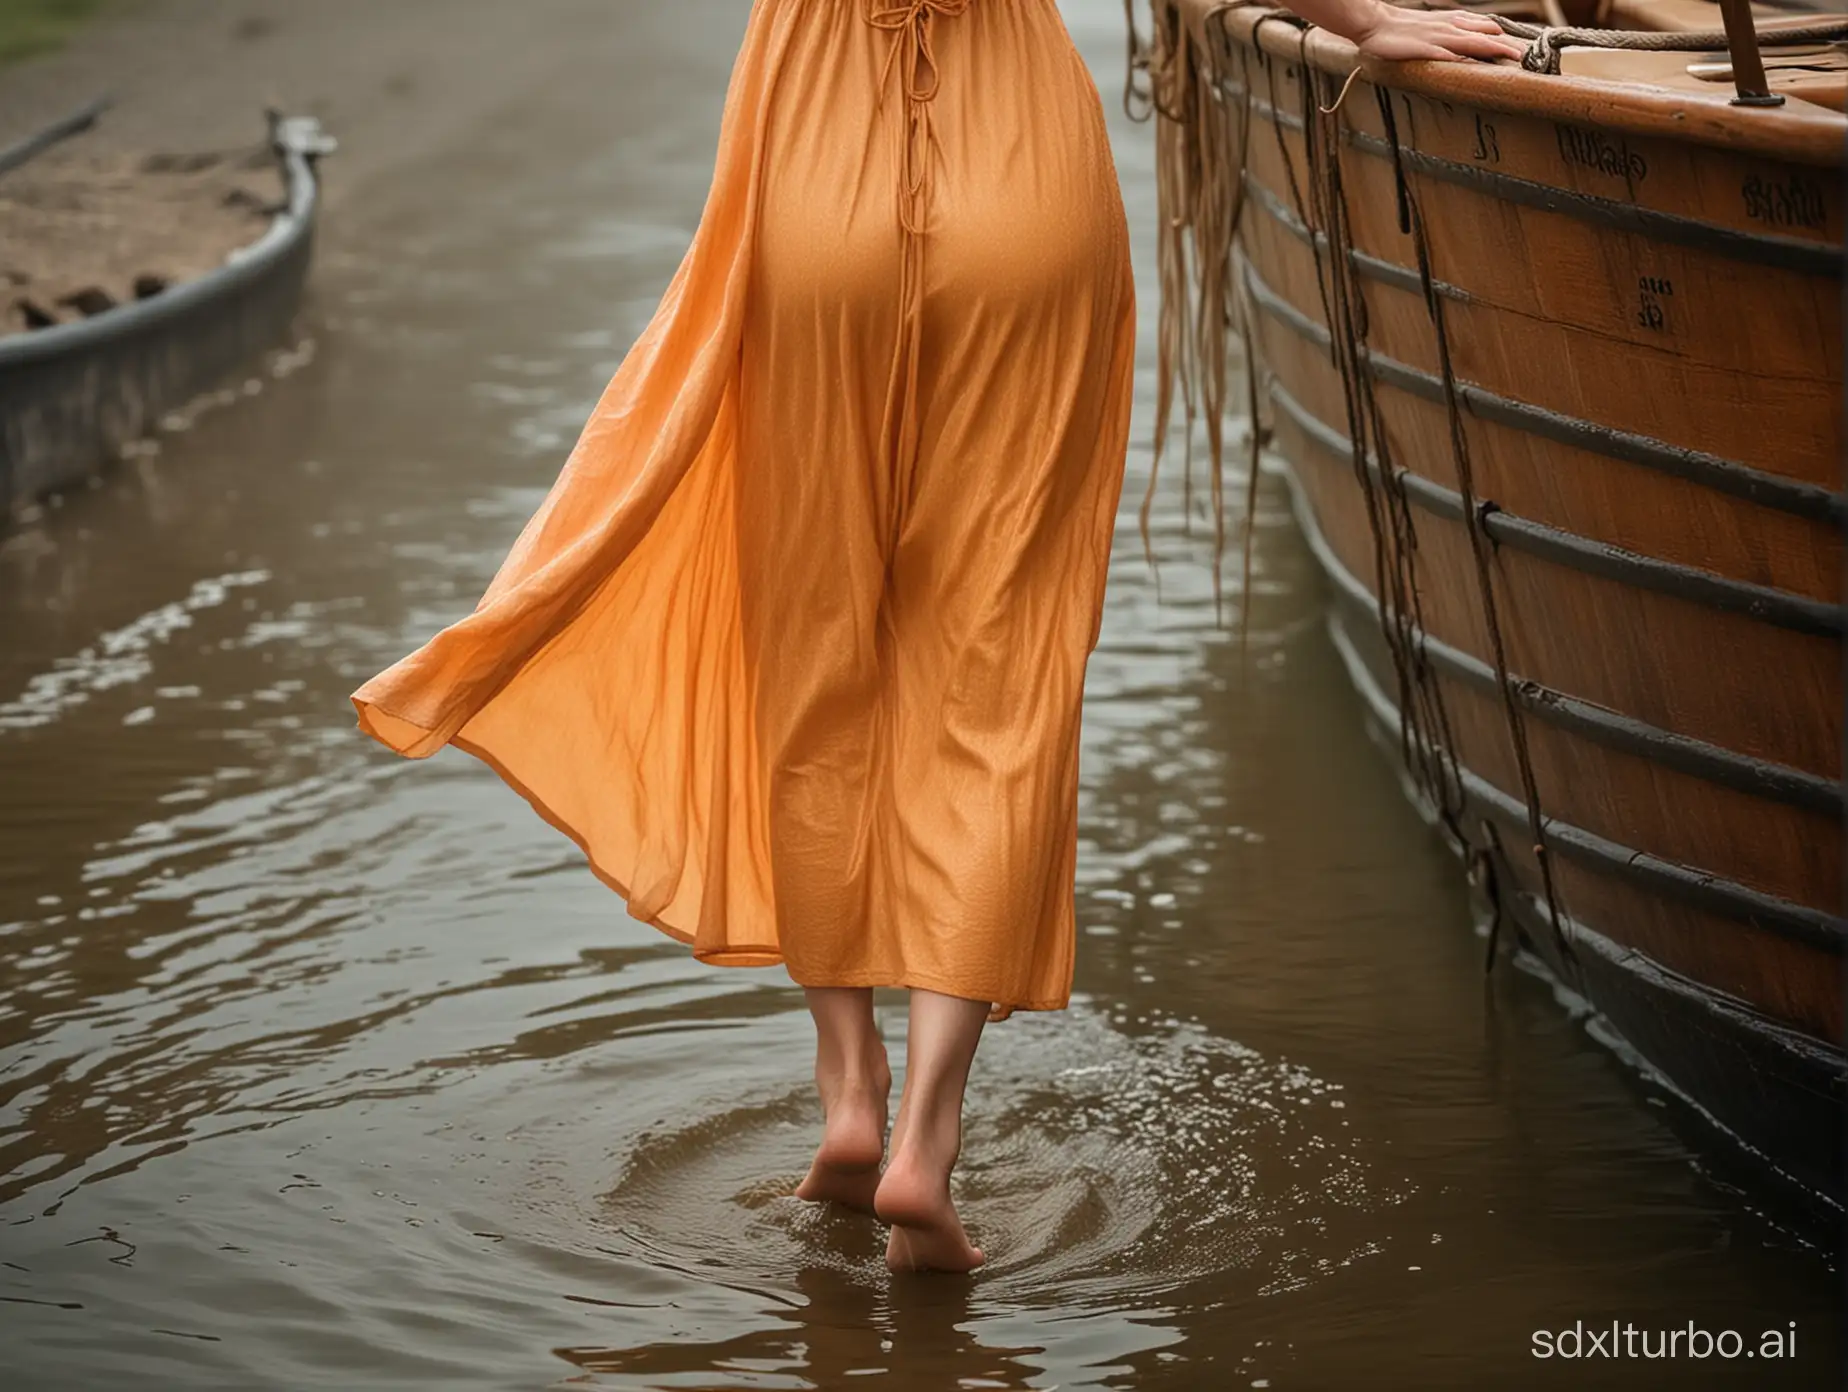 Medieval-Girl-with-Russet-Hair-Stands-on-Boat-Edge